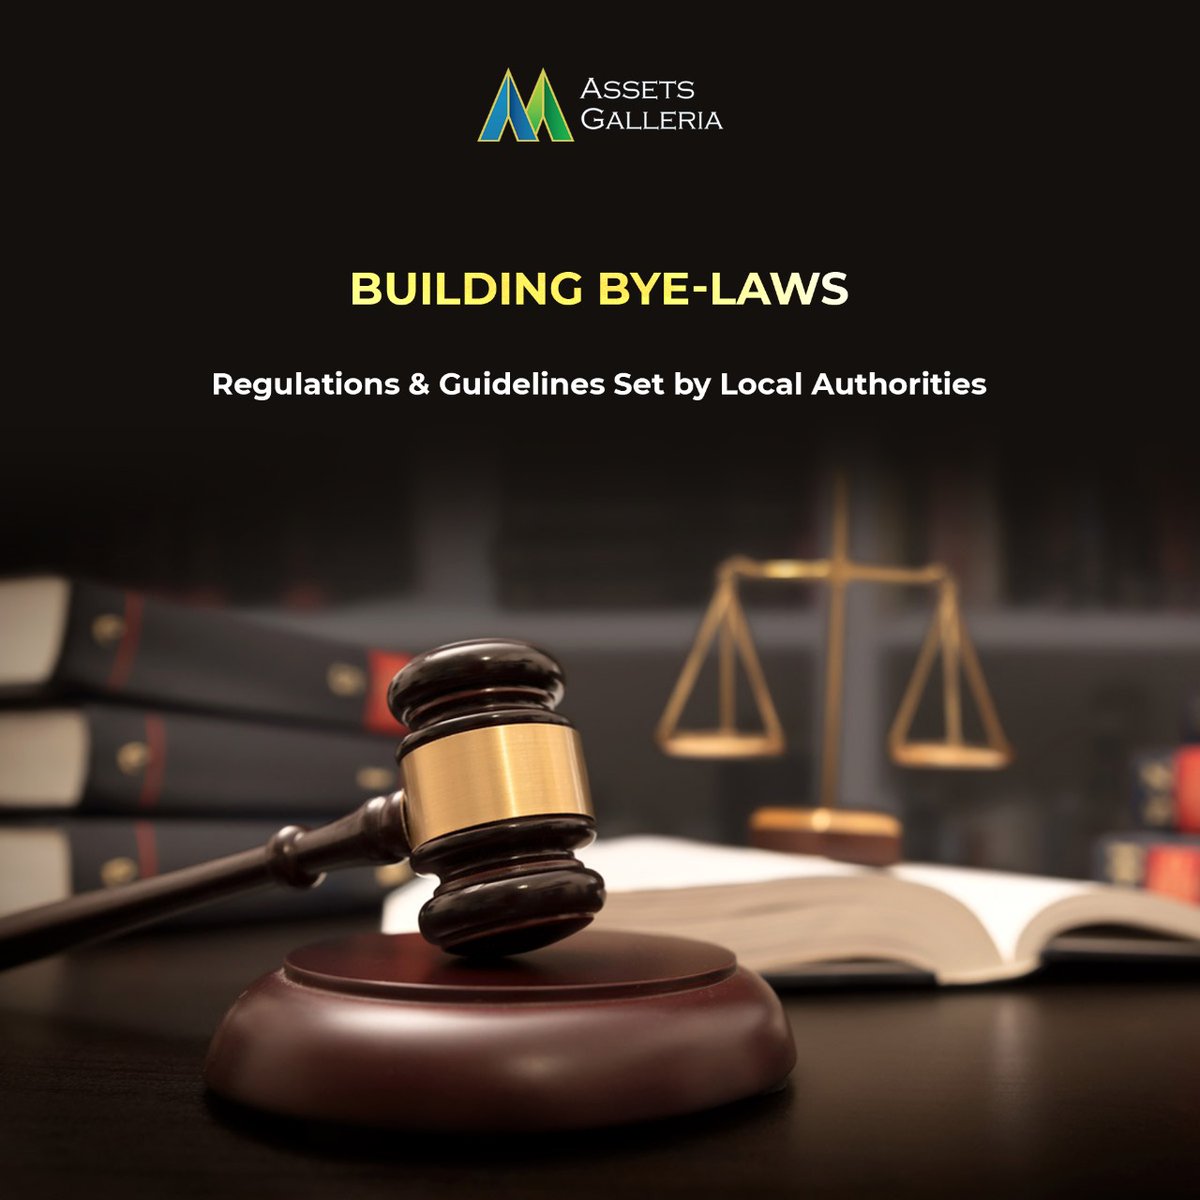 Building Bye-Laws

Regulations & Guidelines Set by Local Authorities

Follow #AssetsGalleria to Know More About #RealEstateMarket